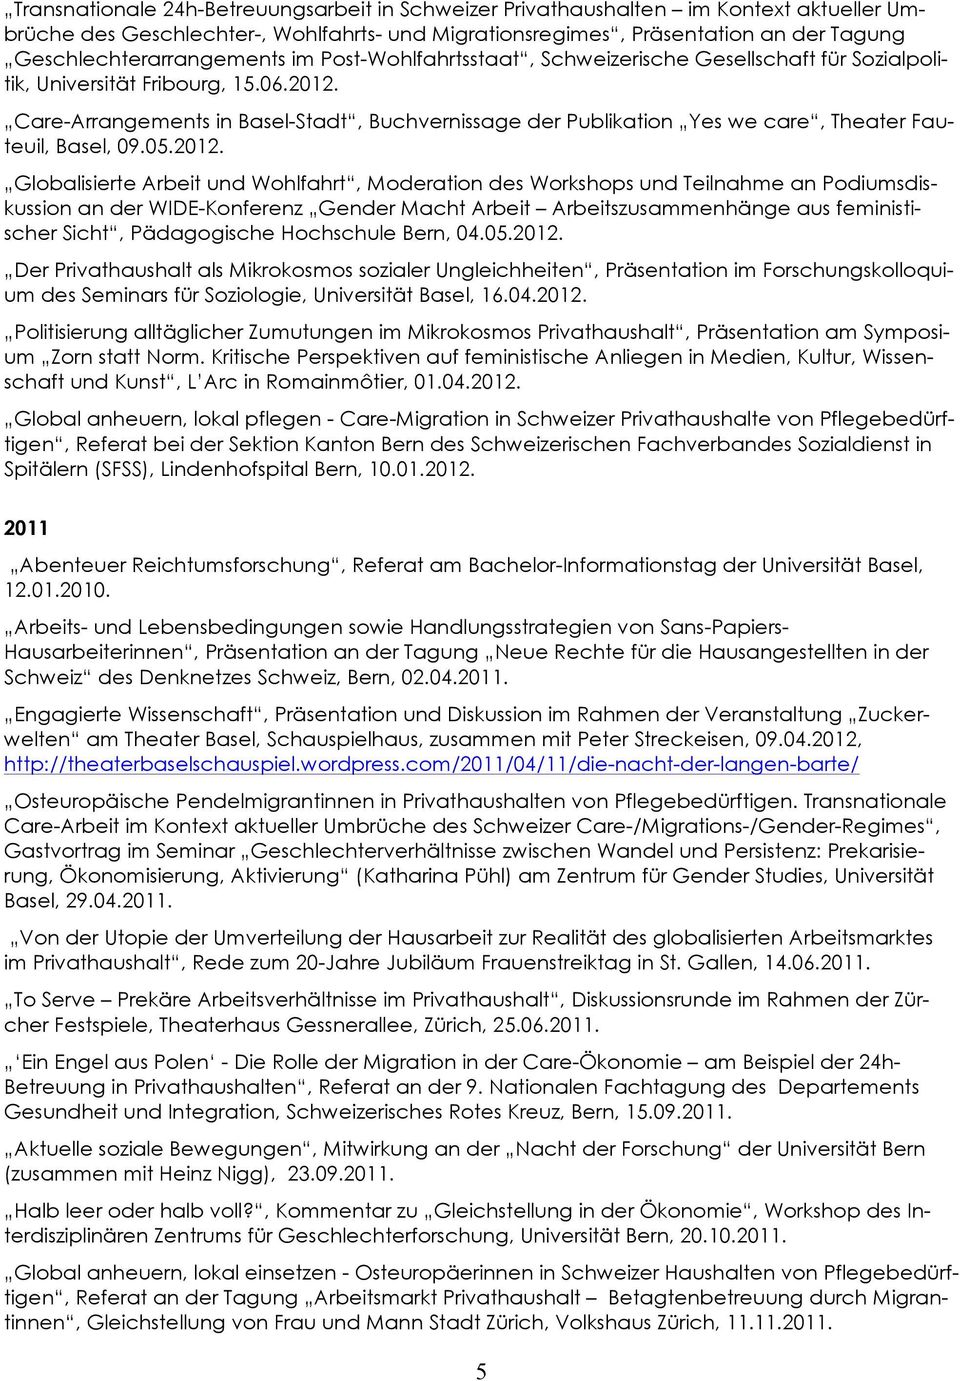 Care-Arrangements in Basel-Stadt, Buchvernissage der Publikation Yes we care, Theater Fauteuil, Basel, 09.05.2012.